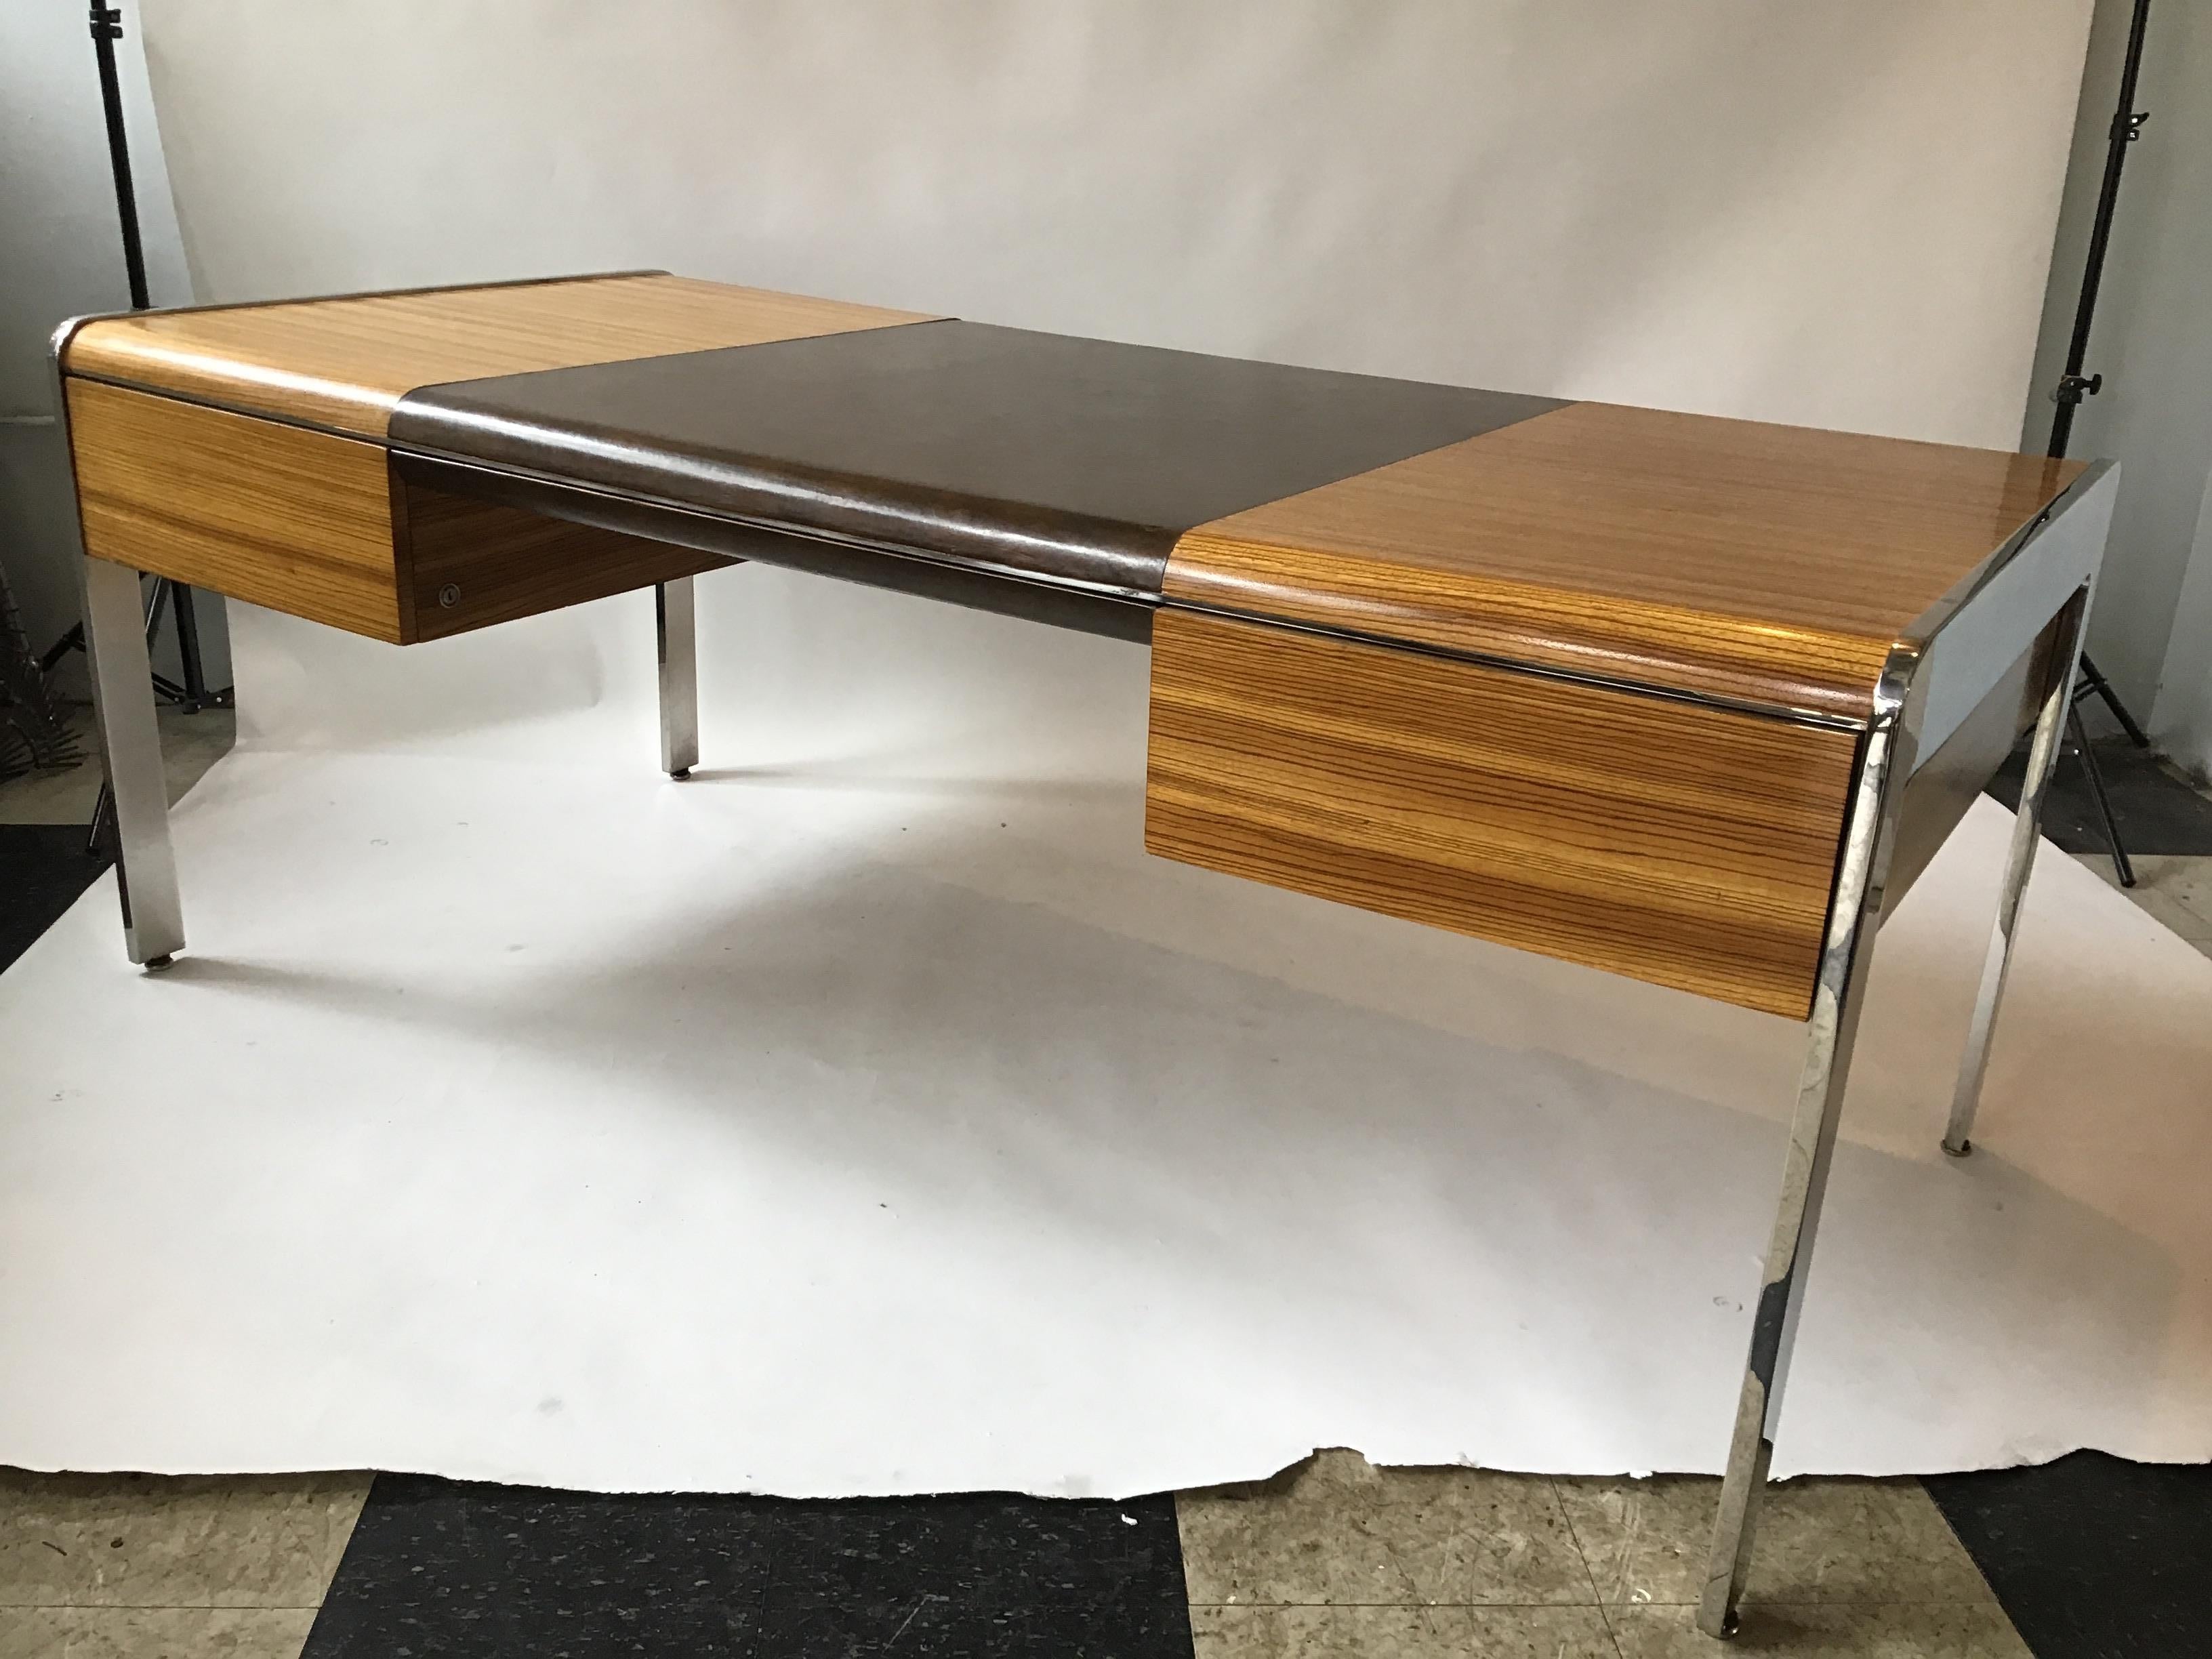 1970s Zebra wood and chrome desk by Leon Rosen for Pace. Leather top. Retractable shelf in back of desk. There are two locks, but no keys.